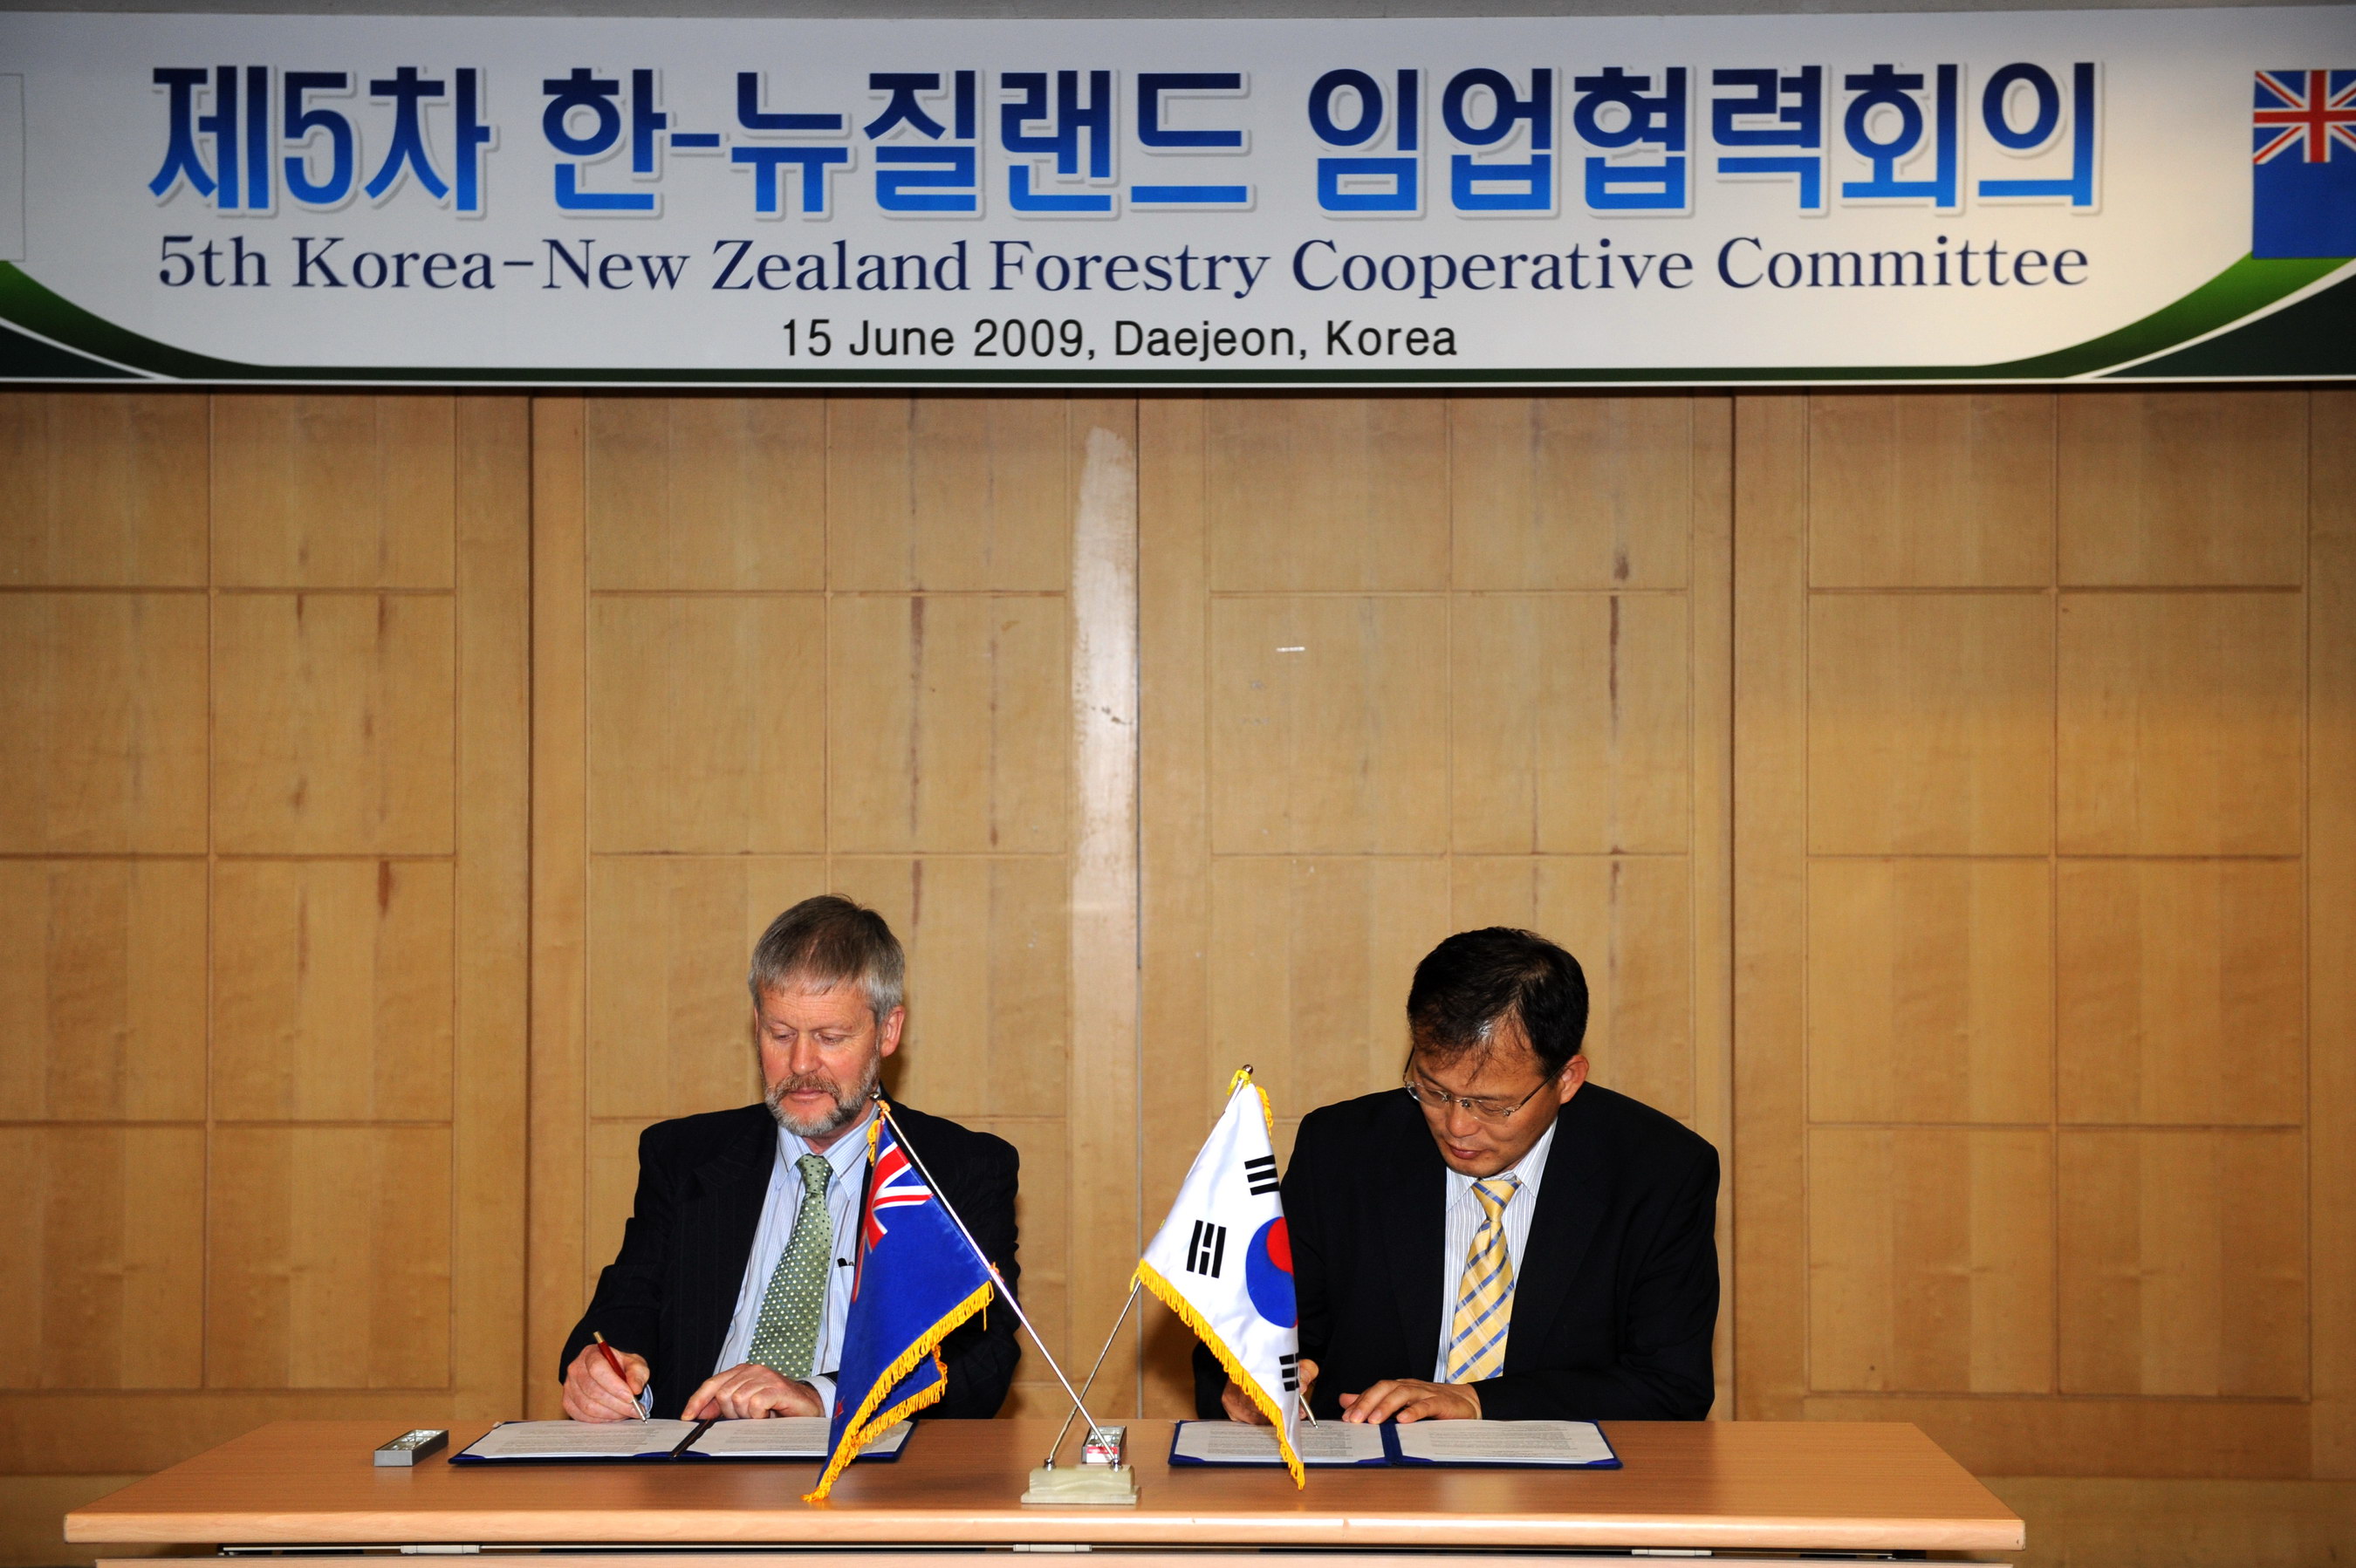 Fifth Korea-New Zealand Forestry Cooperative Committee